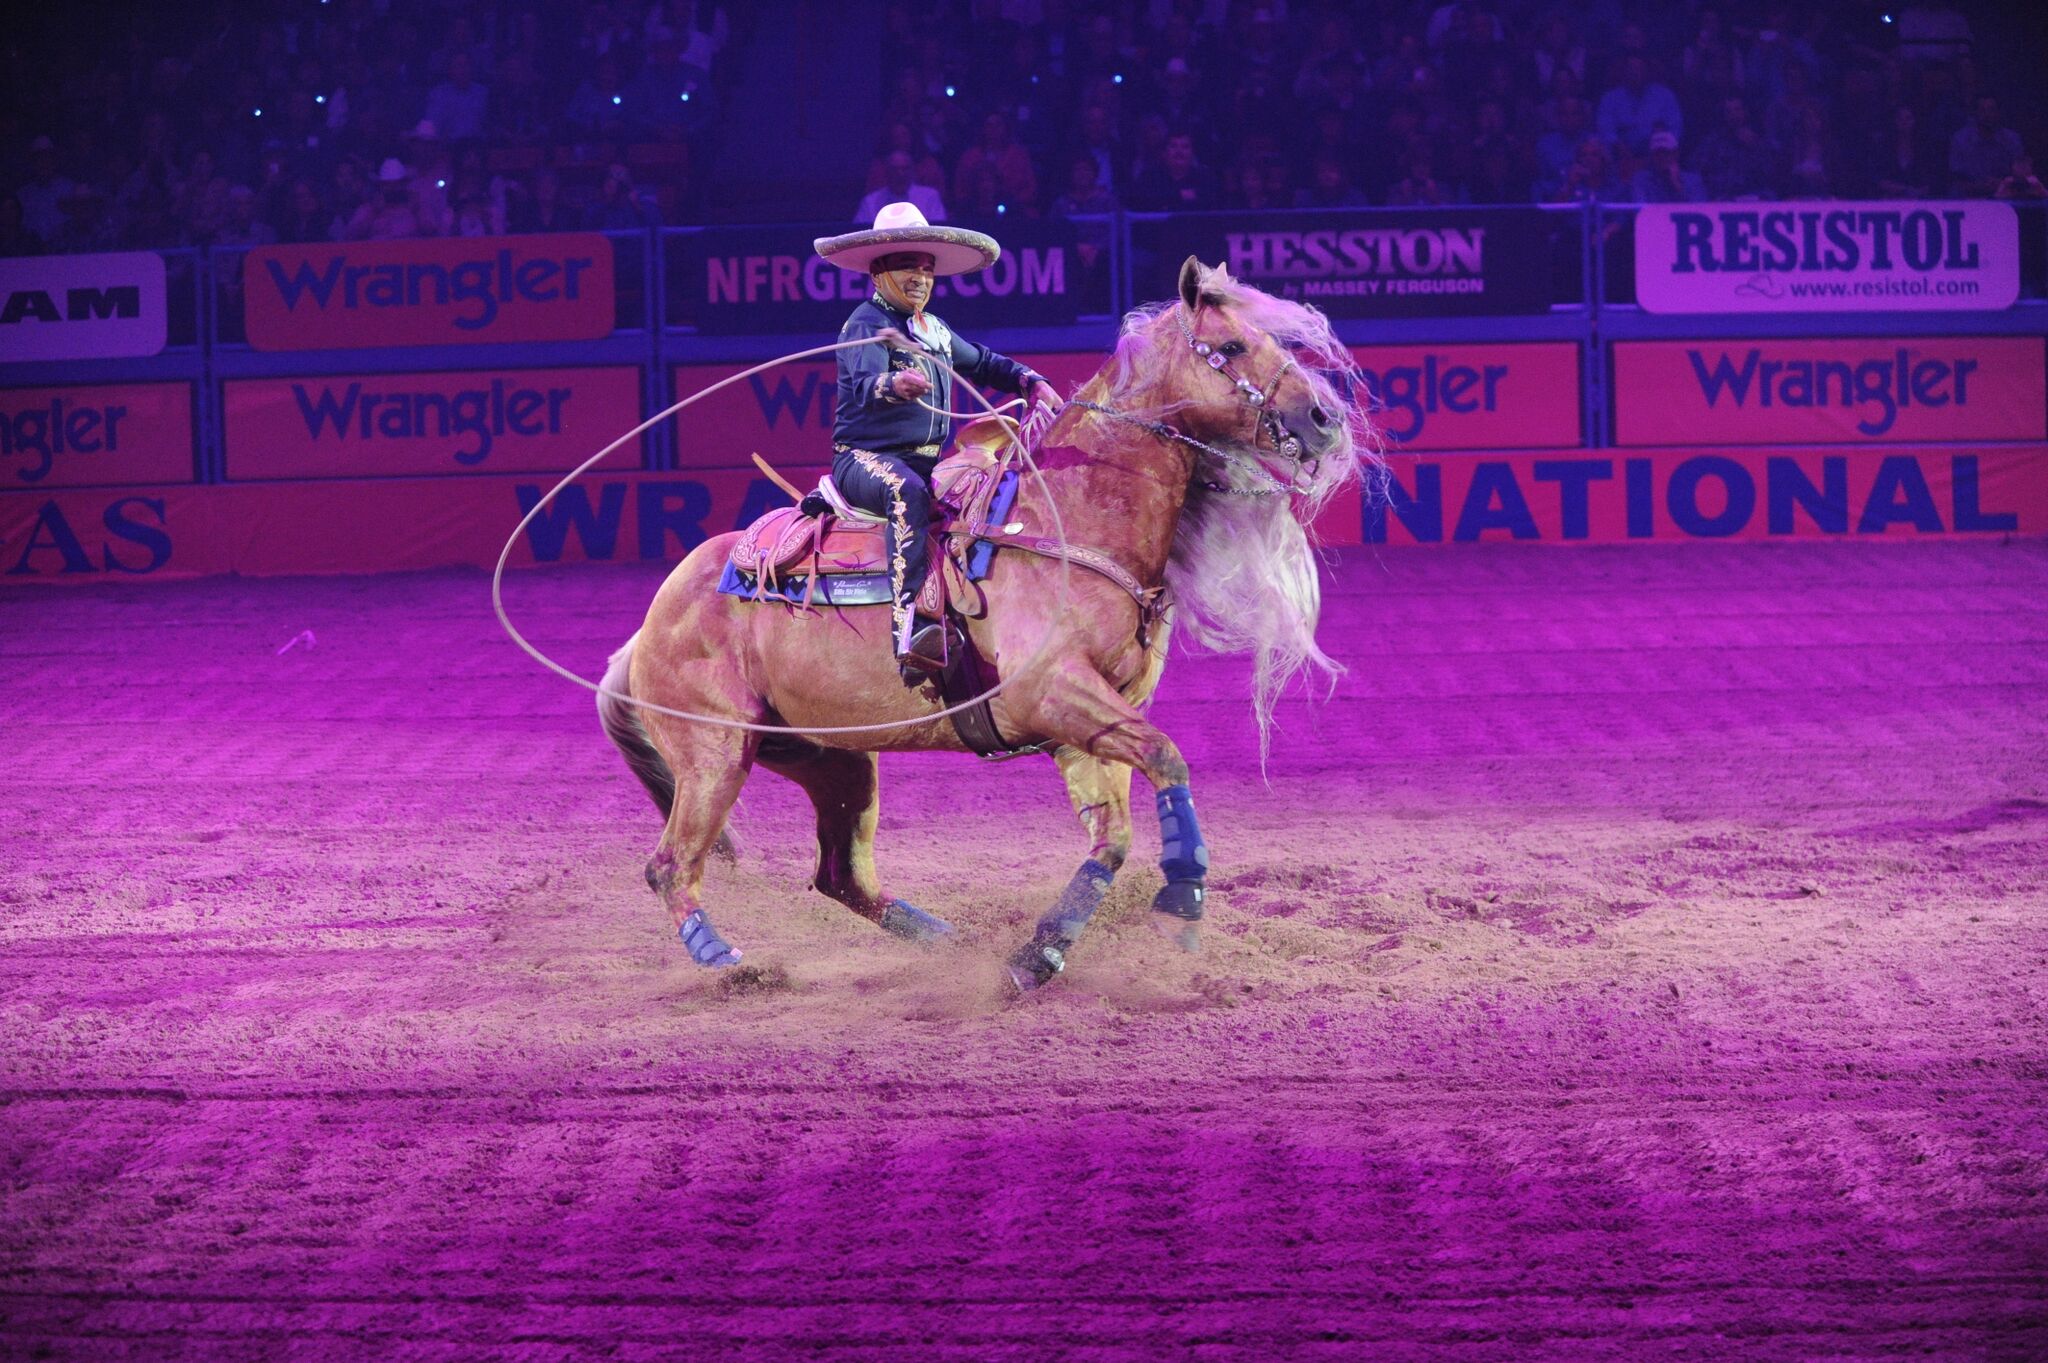 Find Tough Enough to Wear Pink at the Wrangler National Finals Rodeo